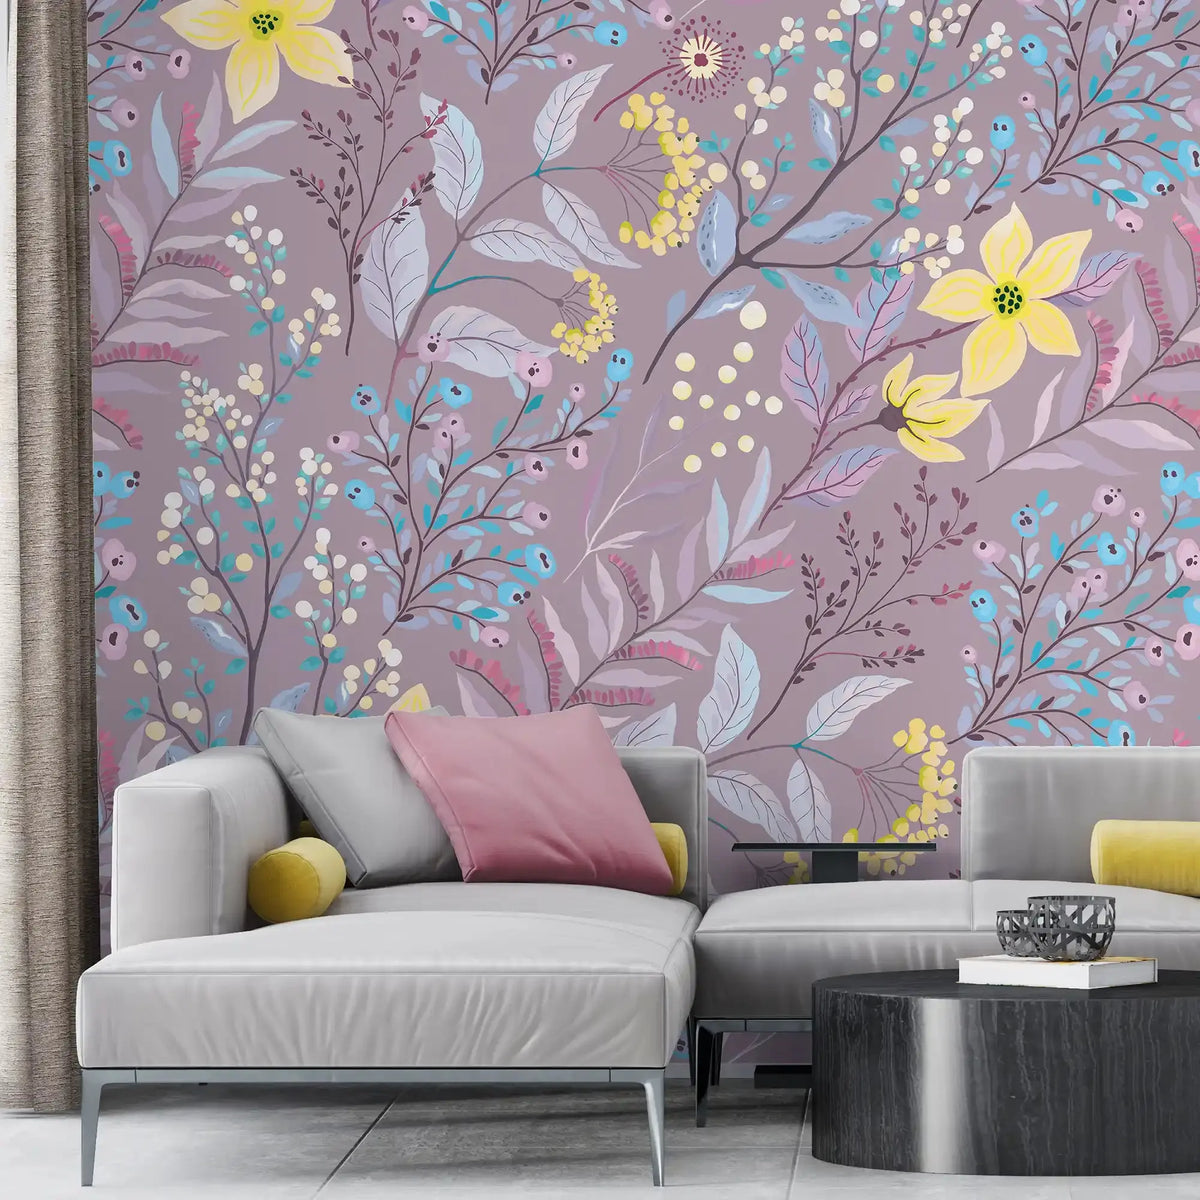 3105-D / Peel and Stick Floral Wallpaper: Pink Flowers and Leaf Design, Easy Apply Wall Decor for Bedroom & Bathroom - Artevella